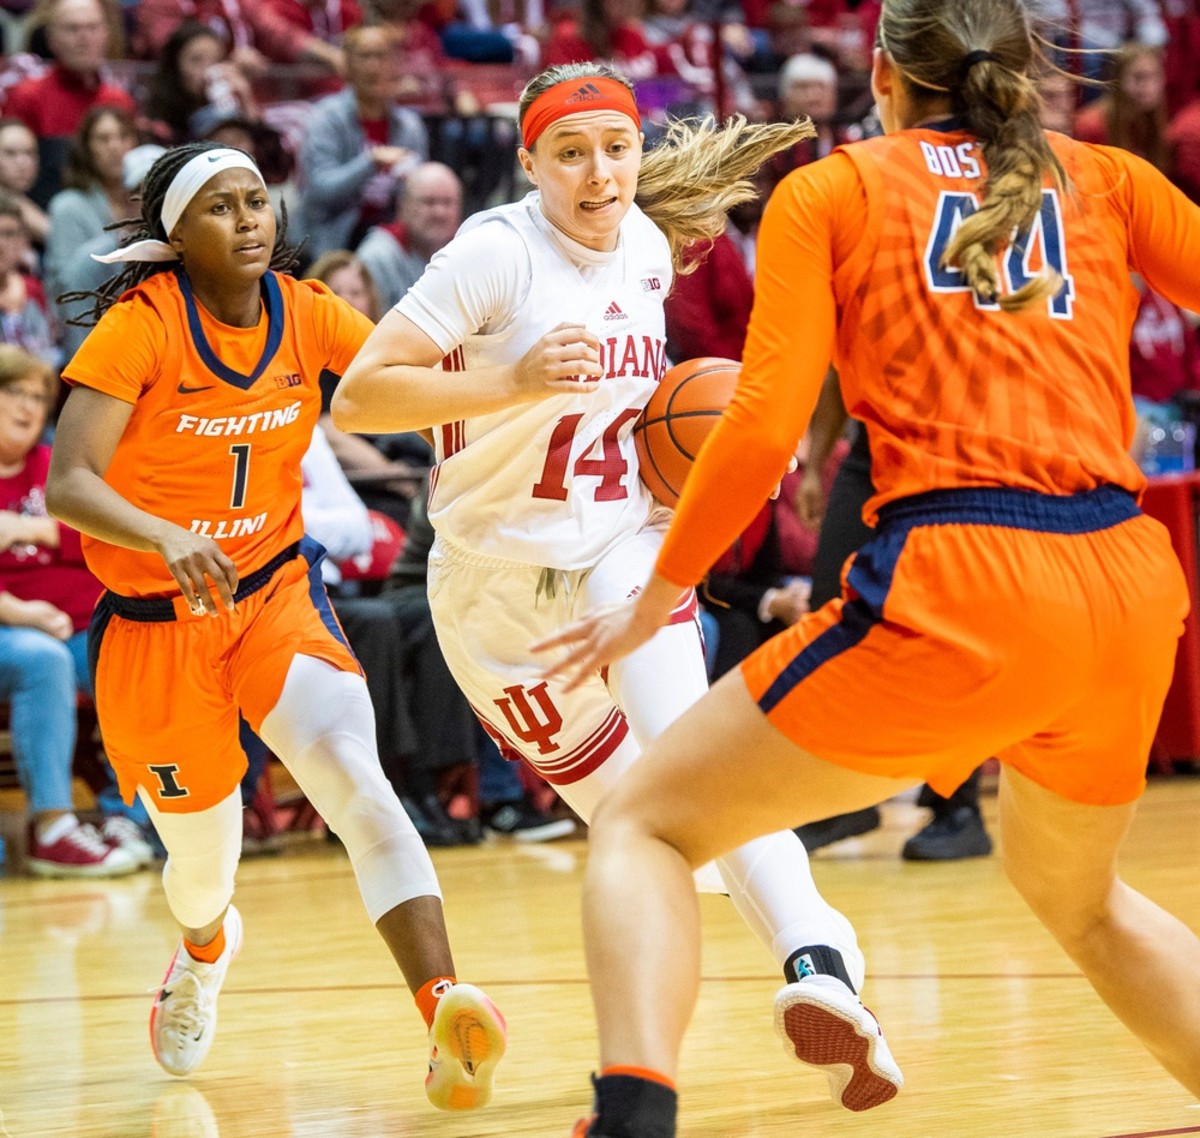 Indiana's Sara Scalia (14) drives on Illinois' Kendall Bostic (44) during the second half of the Indiana versus Illinois women's basketball game at Simon Skjodt Assembly Hall on Sunday, Dec. 4, 2022.